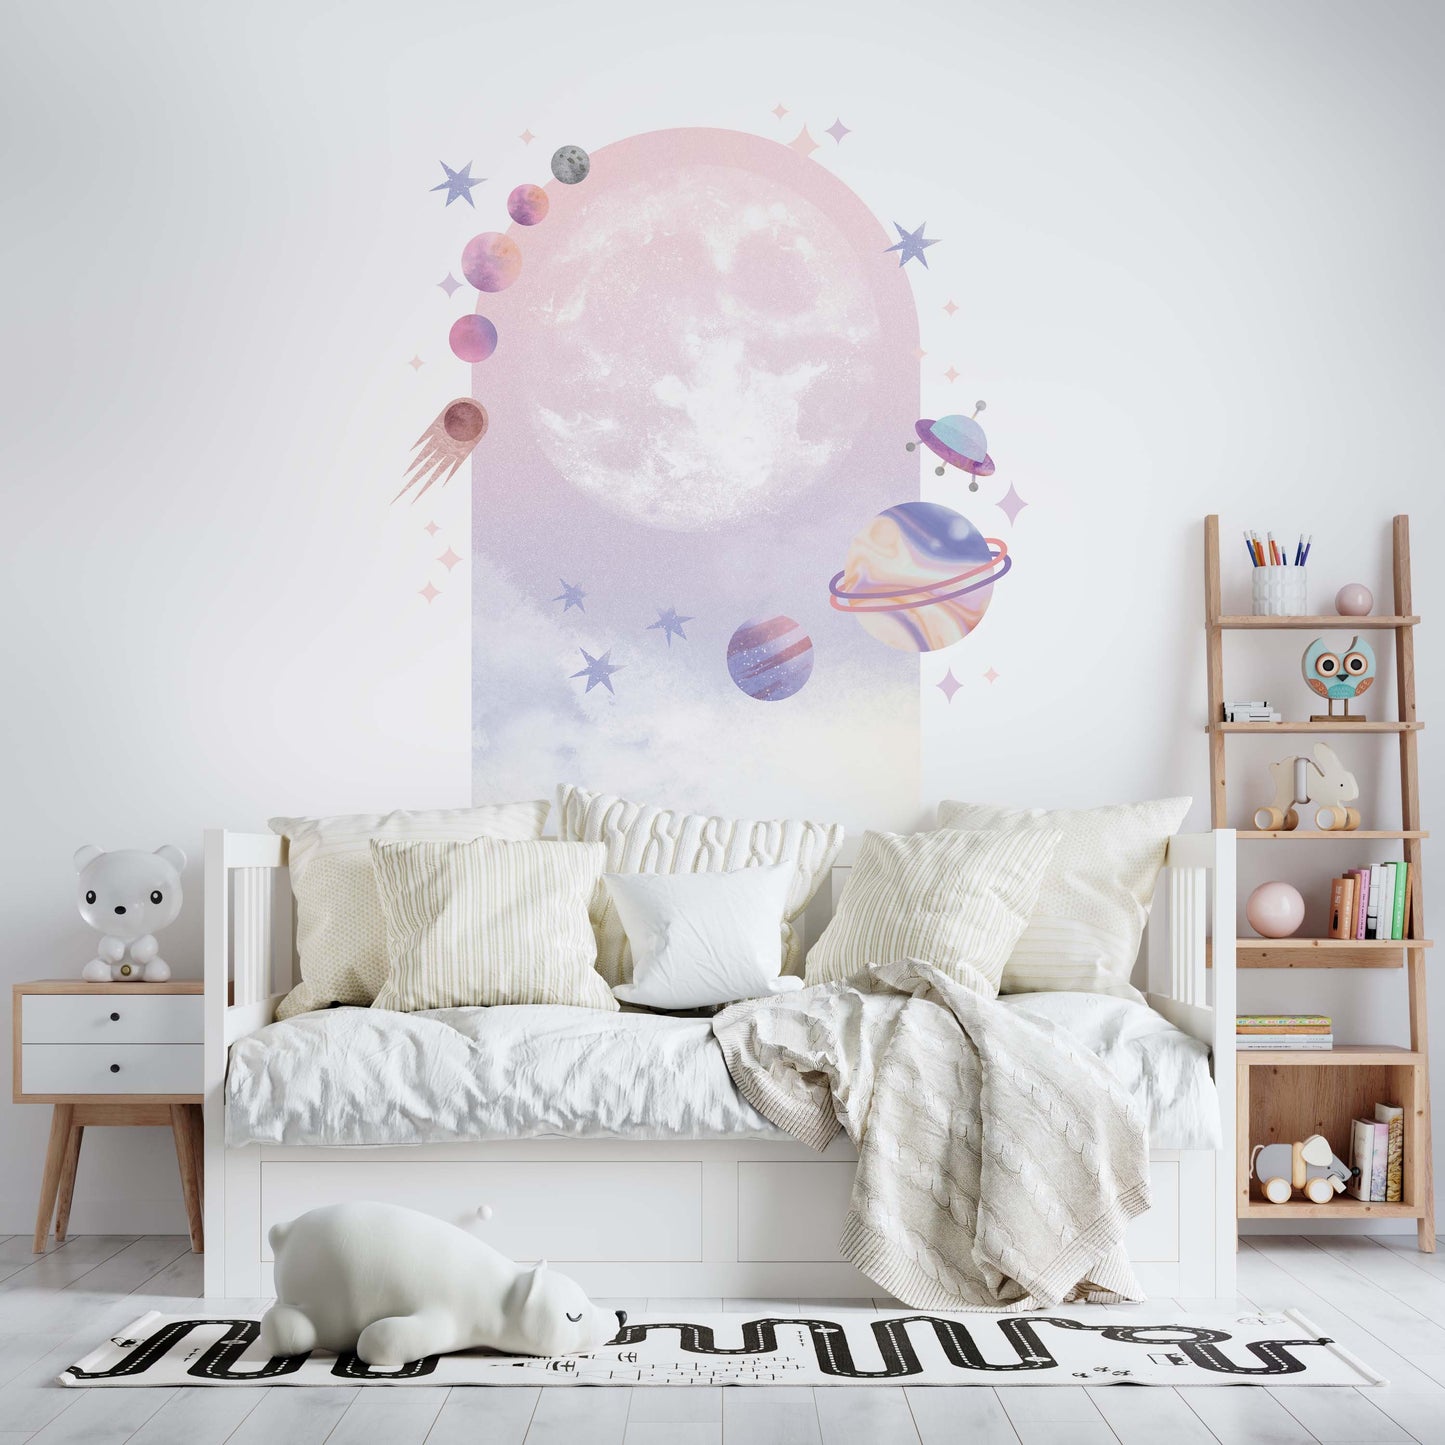 Cosmos Stickers Arch Headboard Clouds Wall Decals Planets, LF315